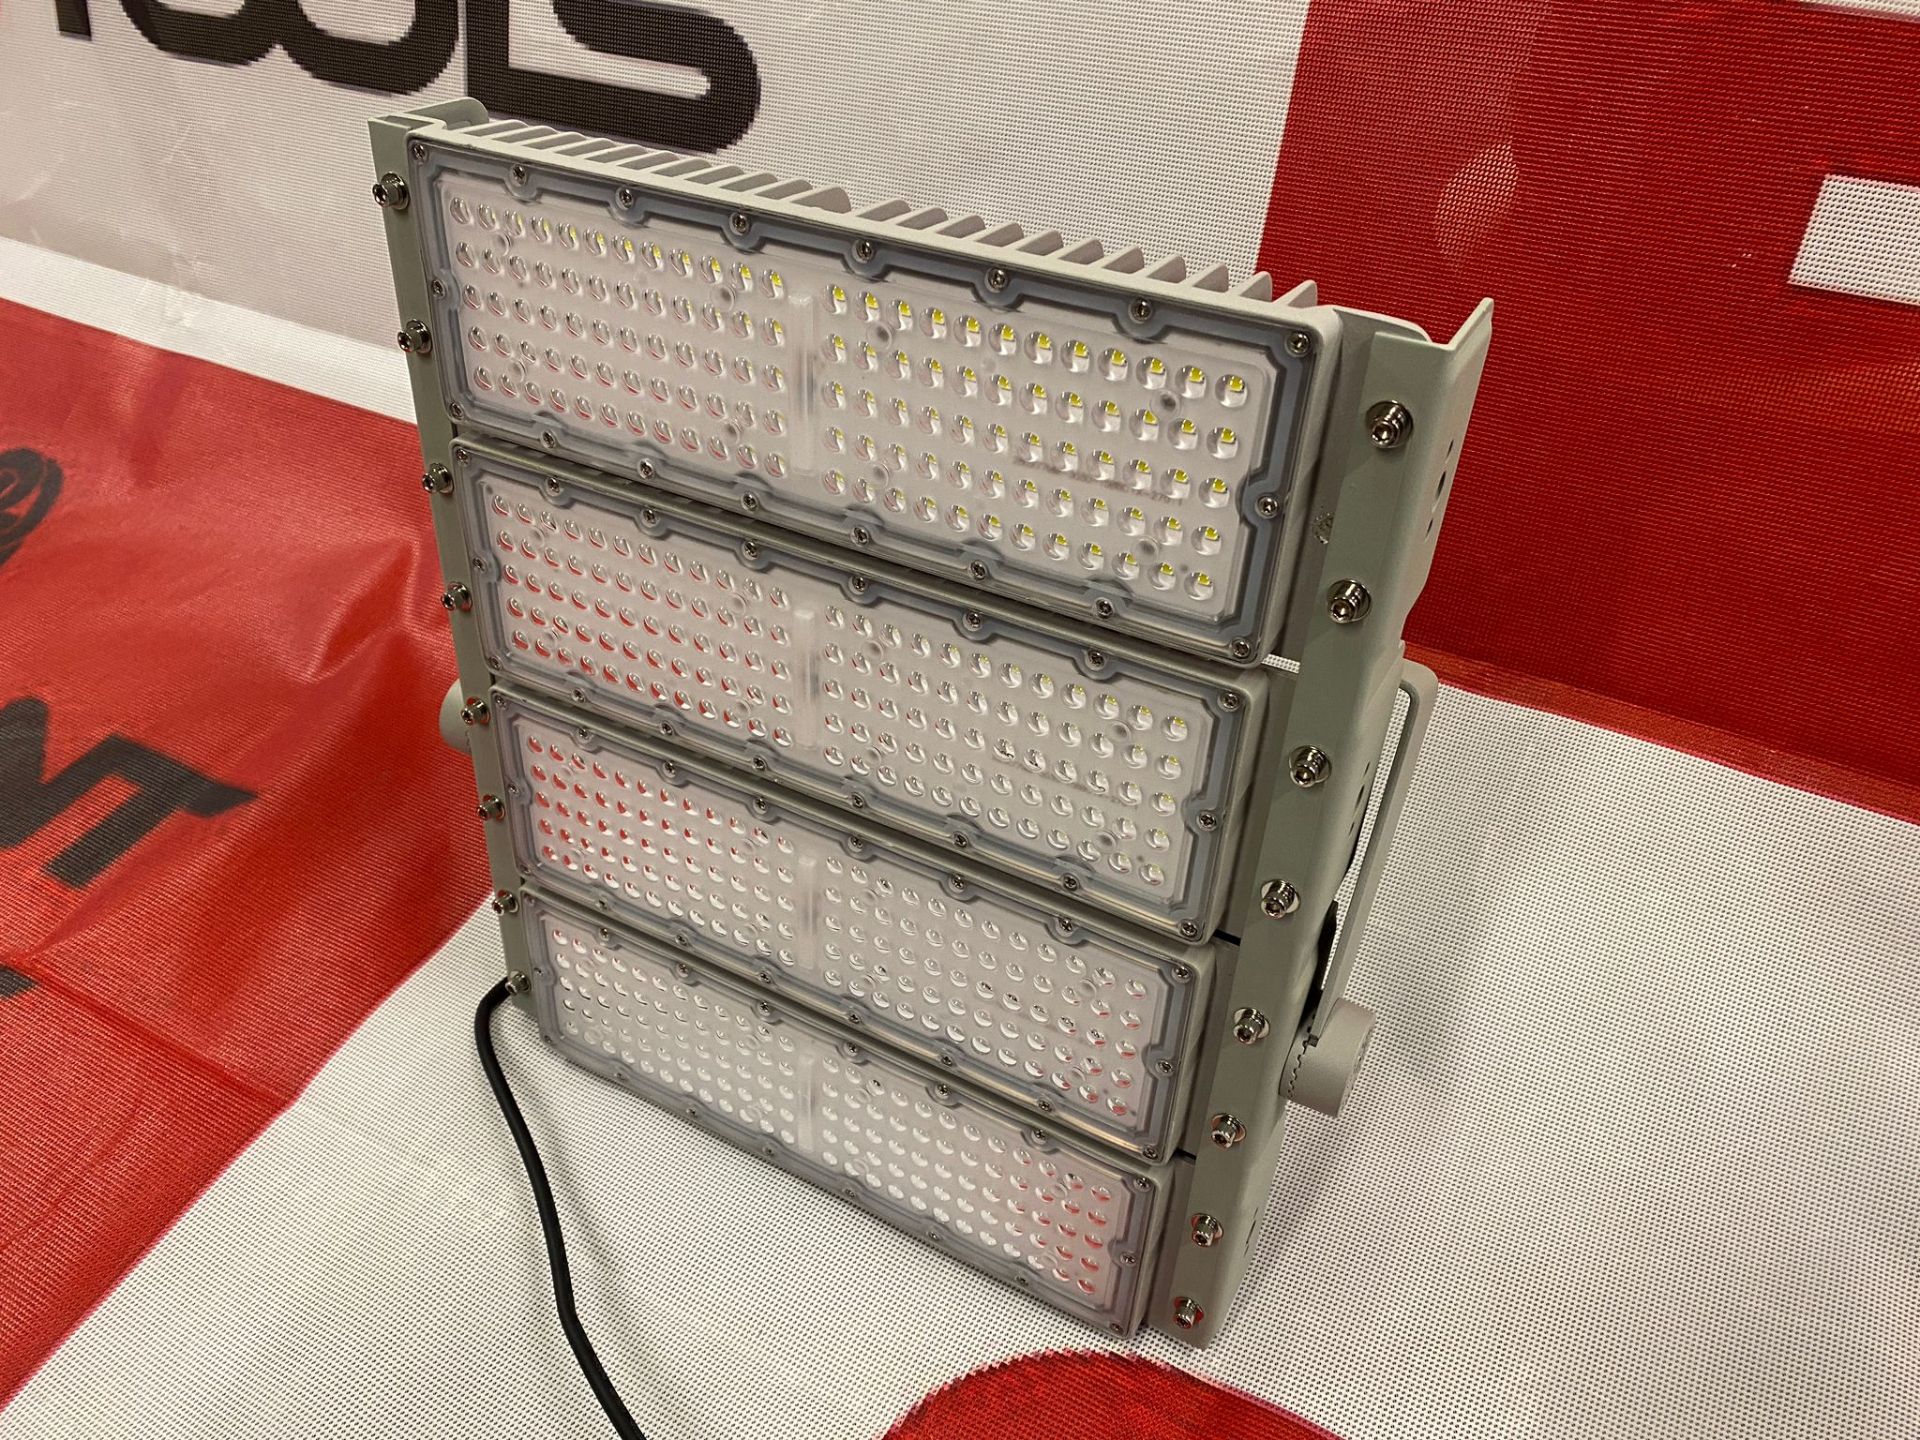 1 x LED400 Watt Flood Light Panel - For Car Parks, Security, Playing fields, Football pitches etc - Image 2 of 8